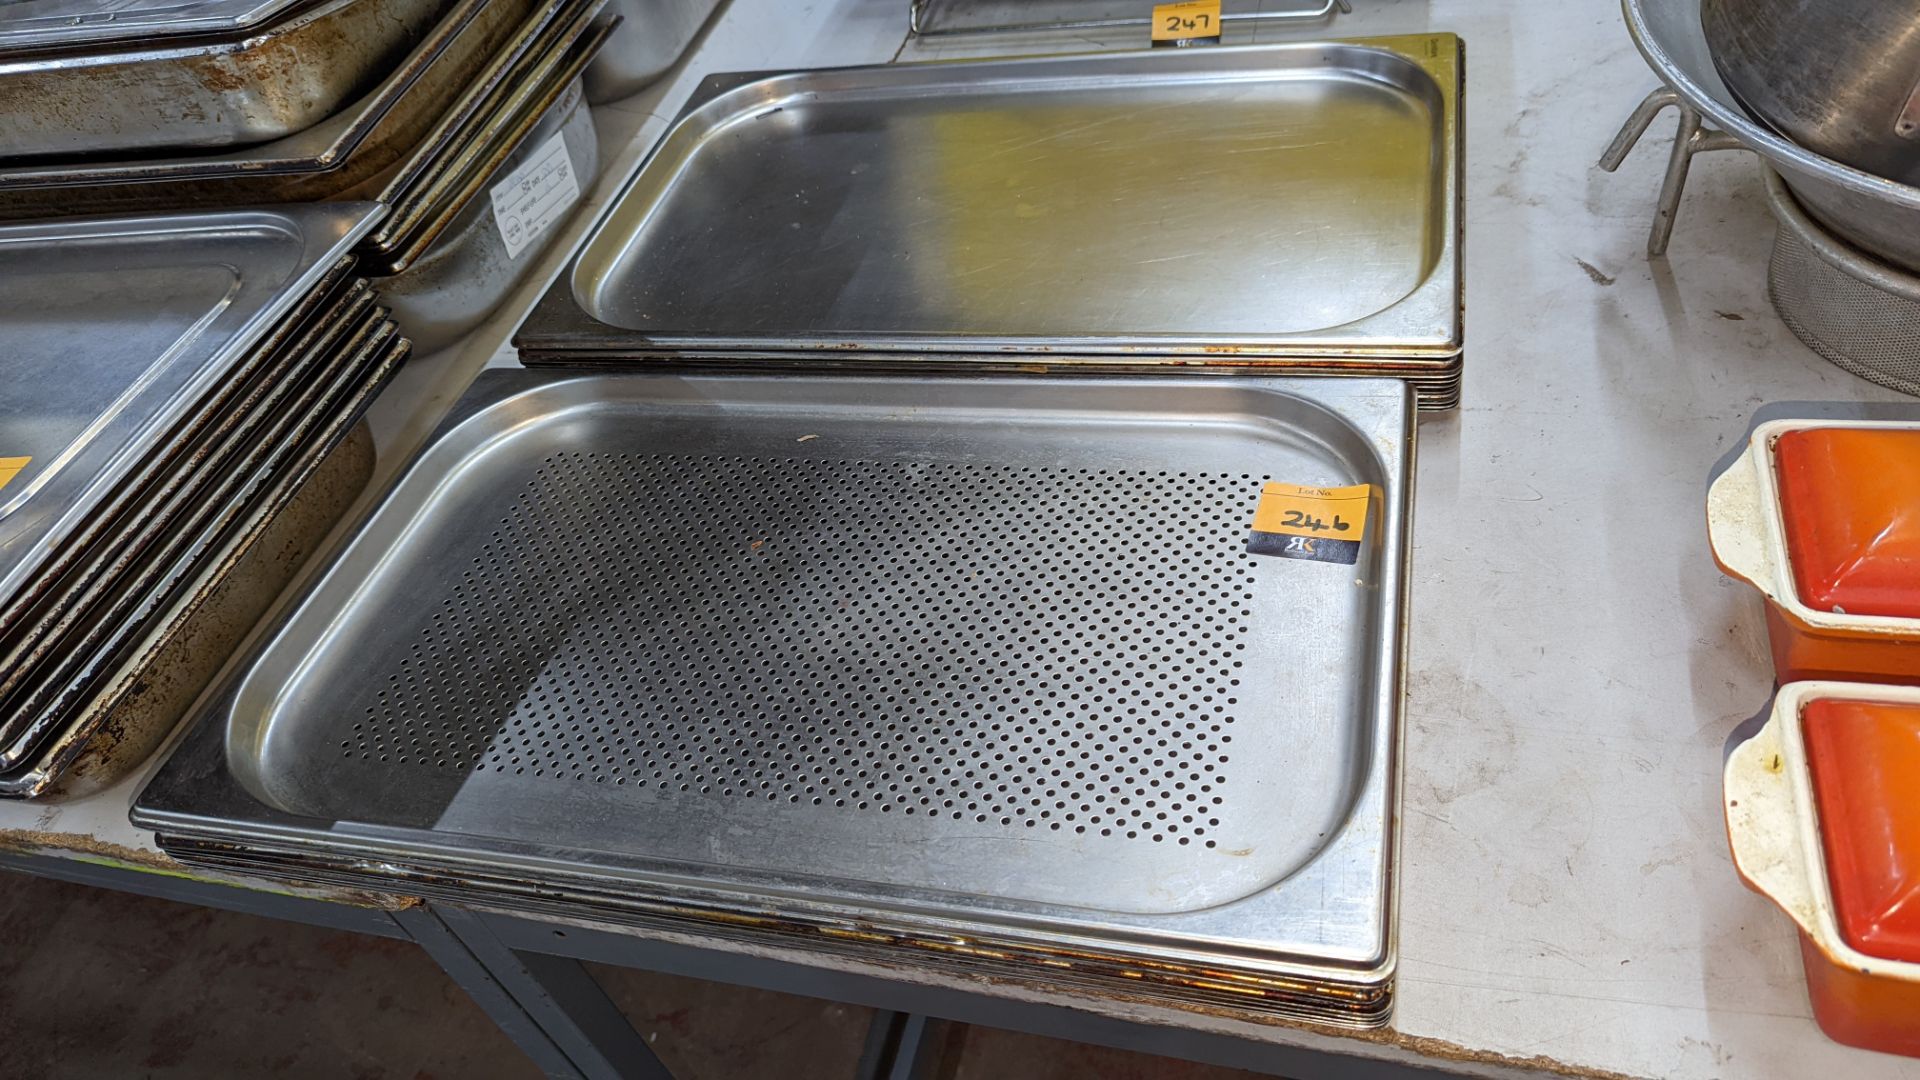 2 stacks of stainless steel rectangular trays including one perforated tray